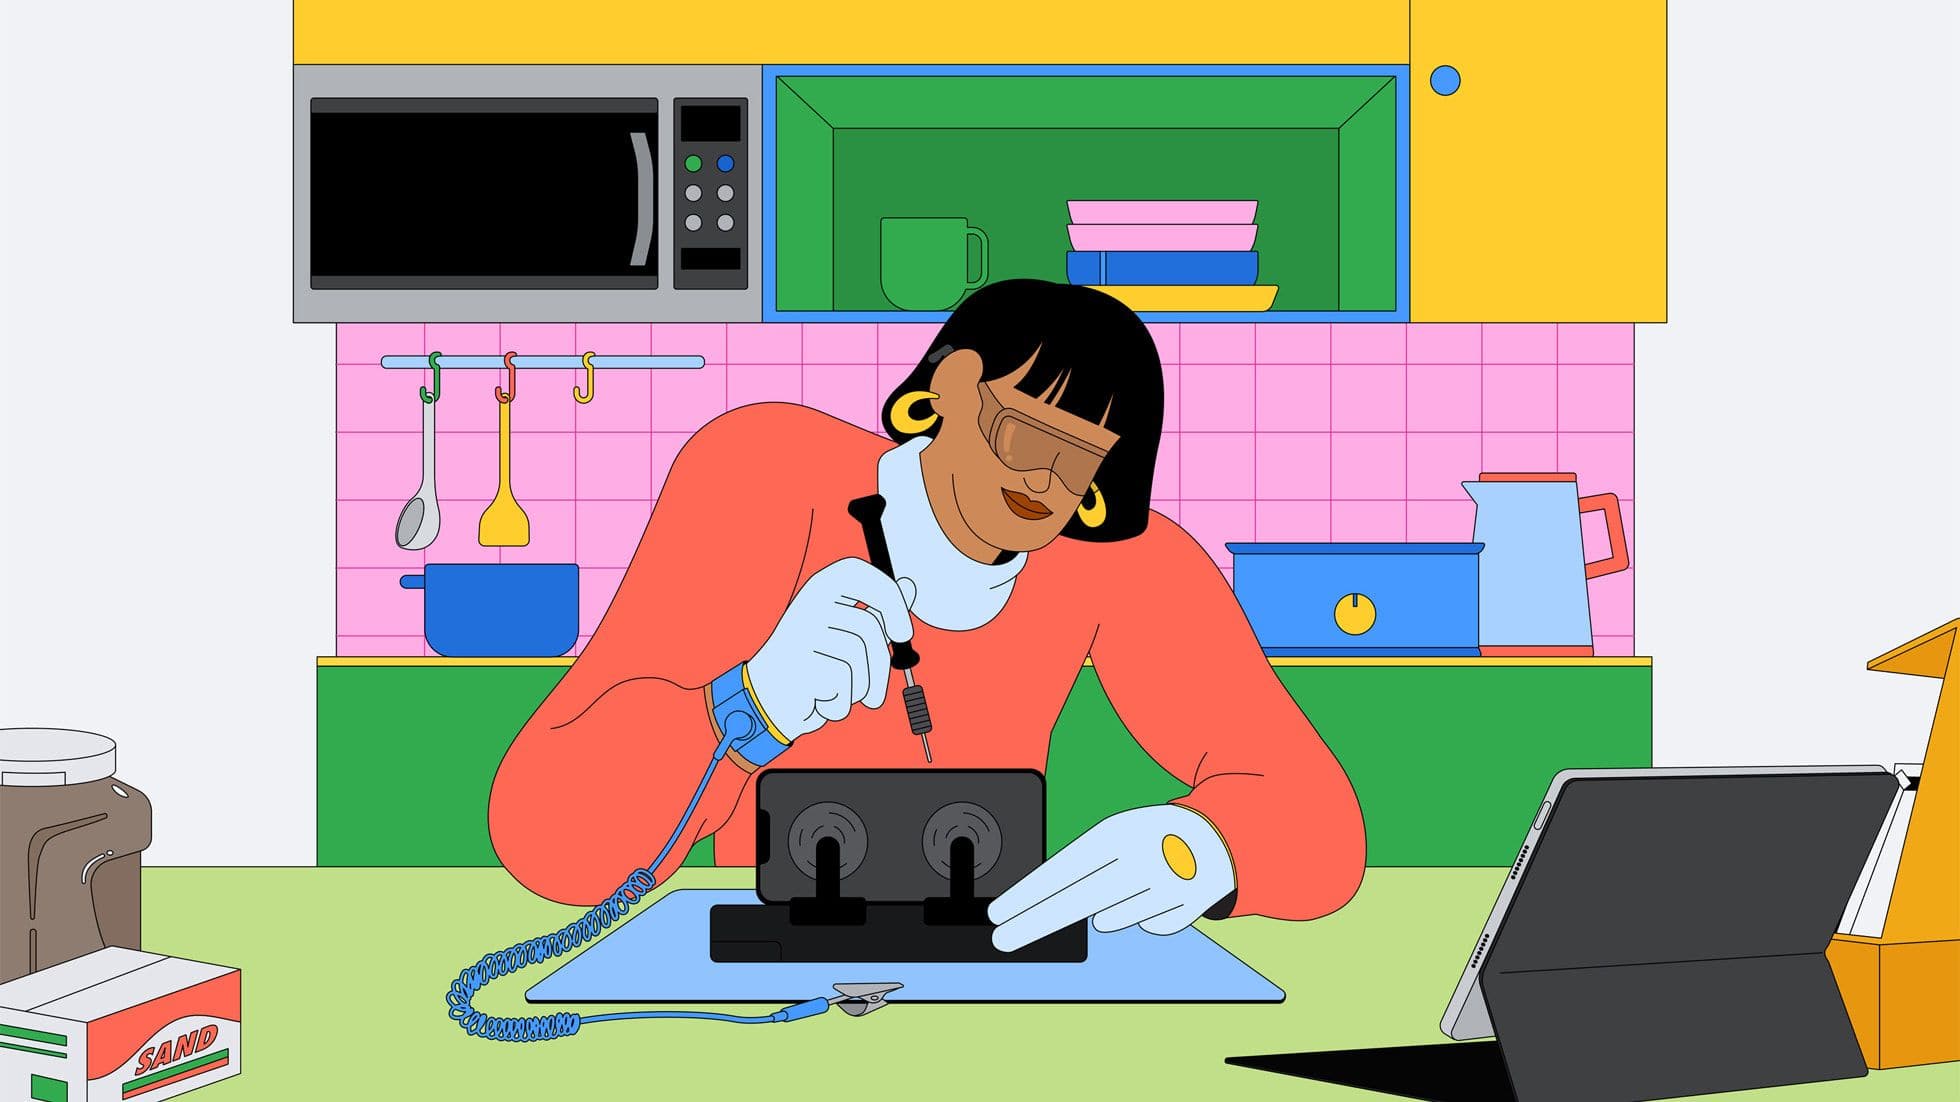 Official animation for Apple's new Self Service Repair Program shows a person hard at work repairing their own Apple devices.